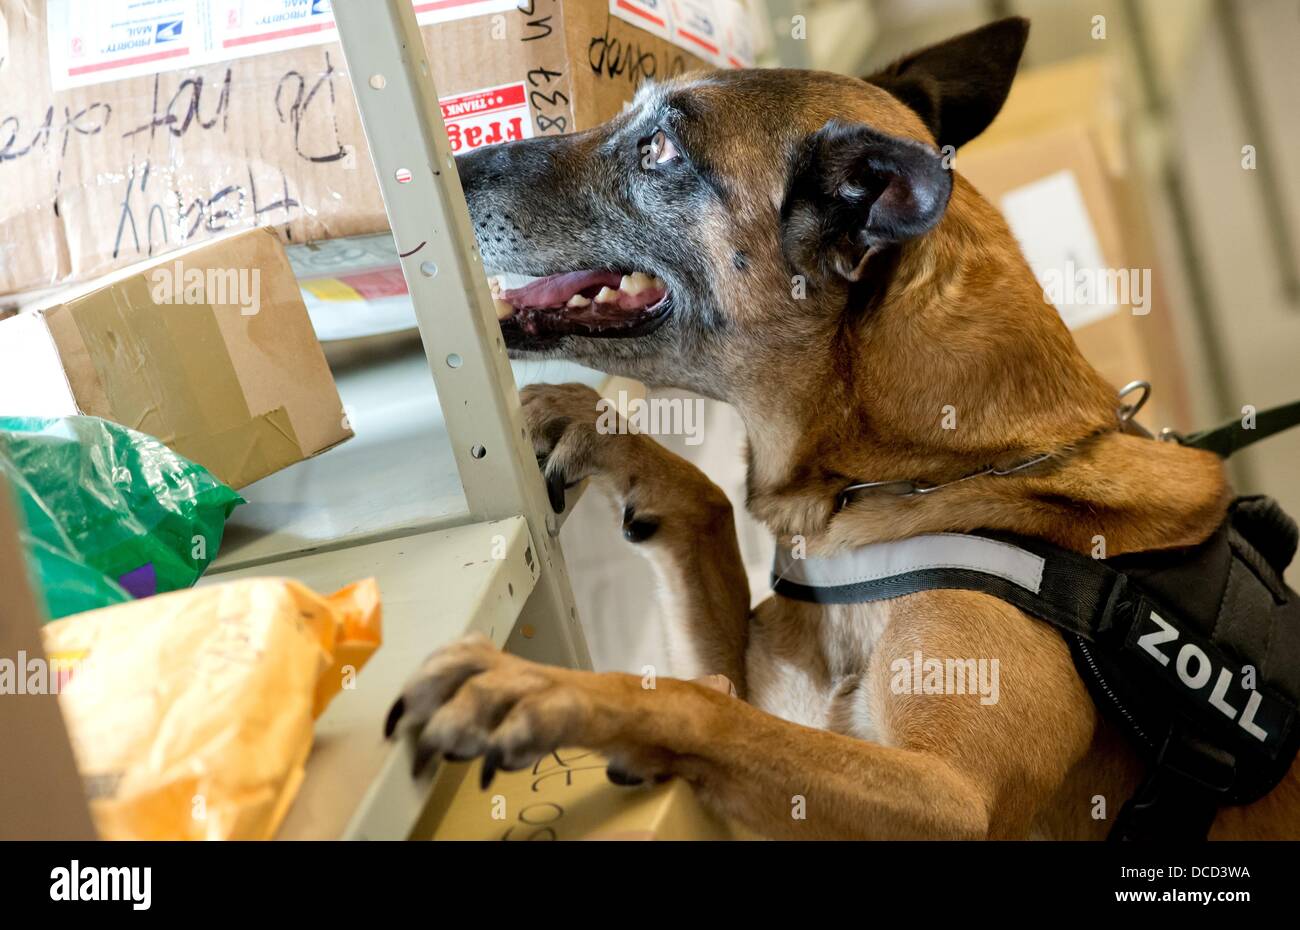 Tracker dog 'Quitta' specializing in doping sniffs at packages during a practice session of the customs office in Hamburg, Germany, 15 August 2013. 'Quitta' is Germany's first doping tracker dog. Photo: SVEN HOPPE Stock Photo